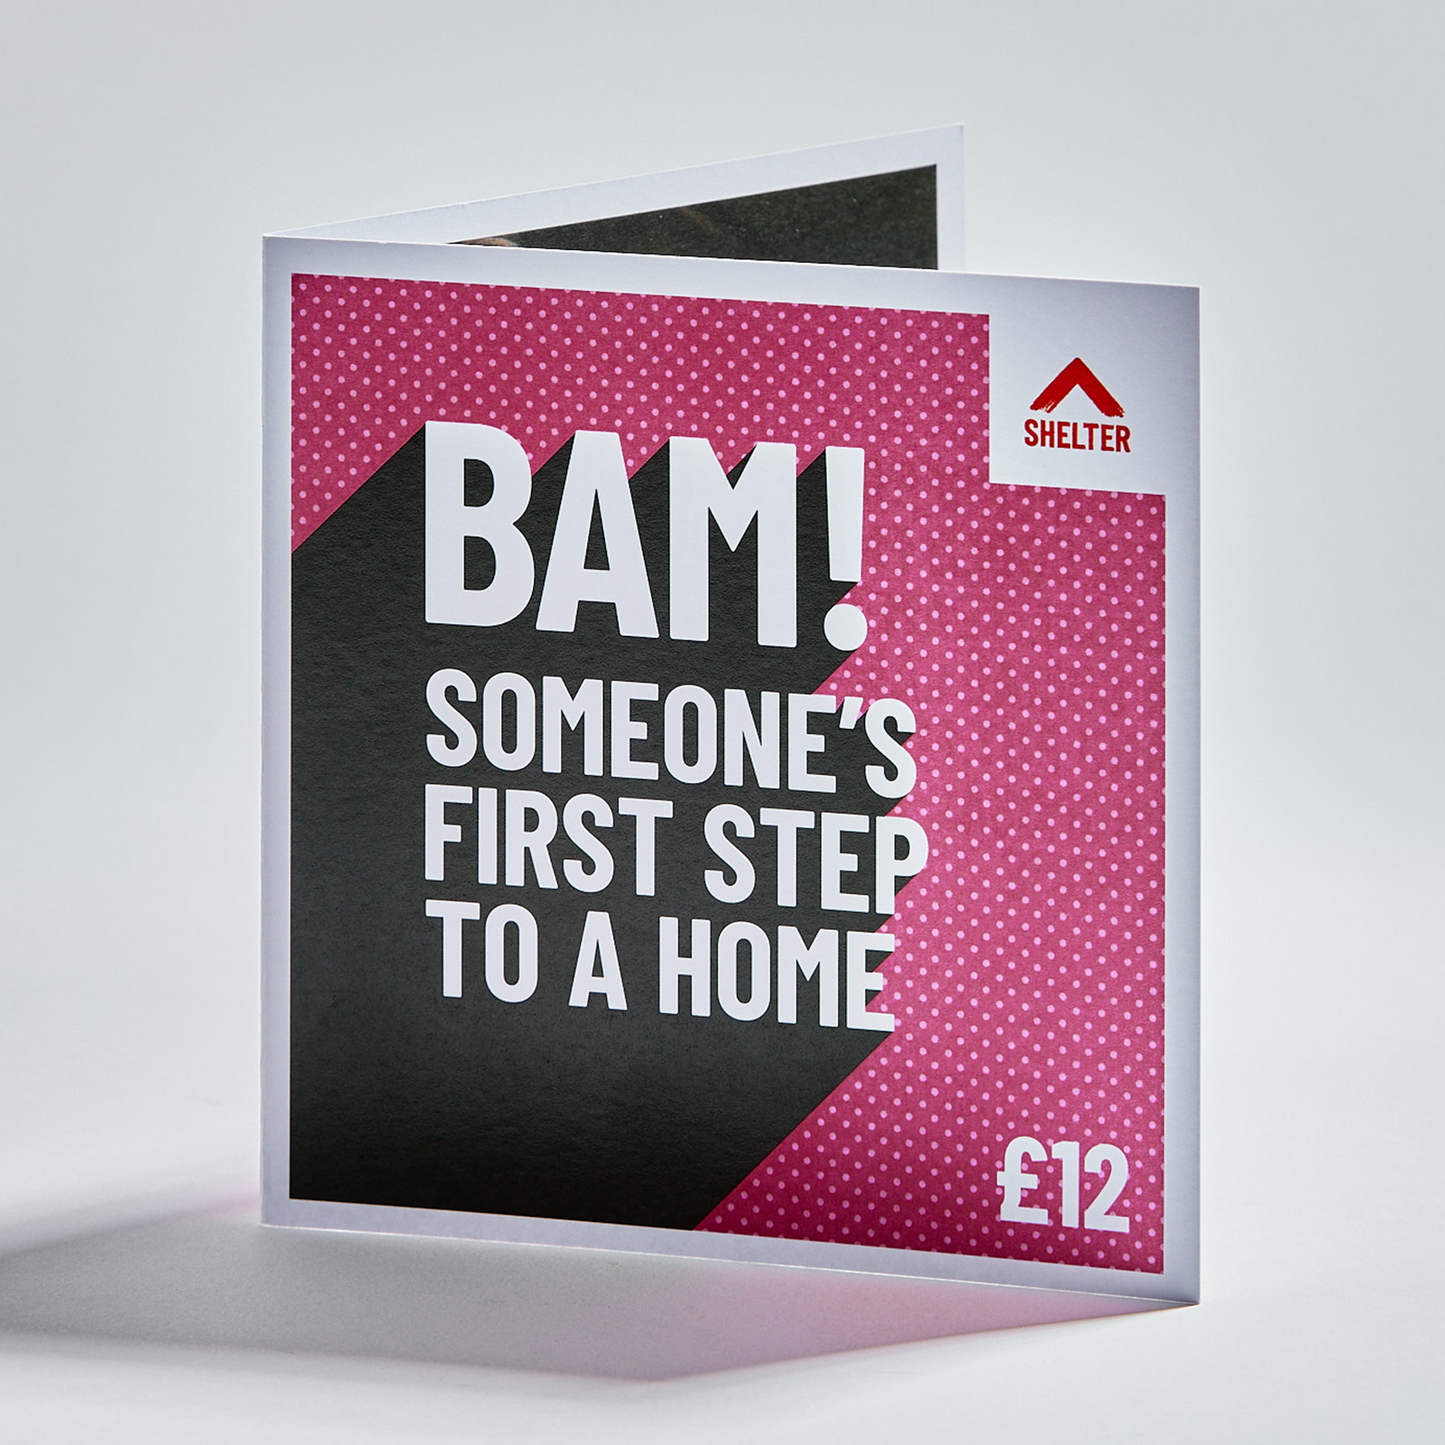 Pink card with bold text "Someone's first step to a home"